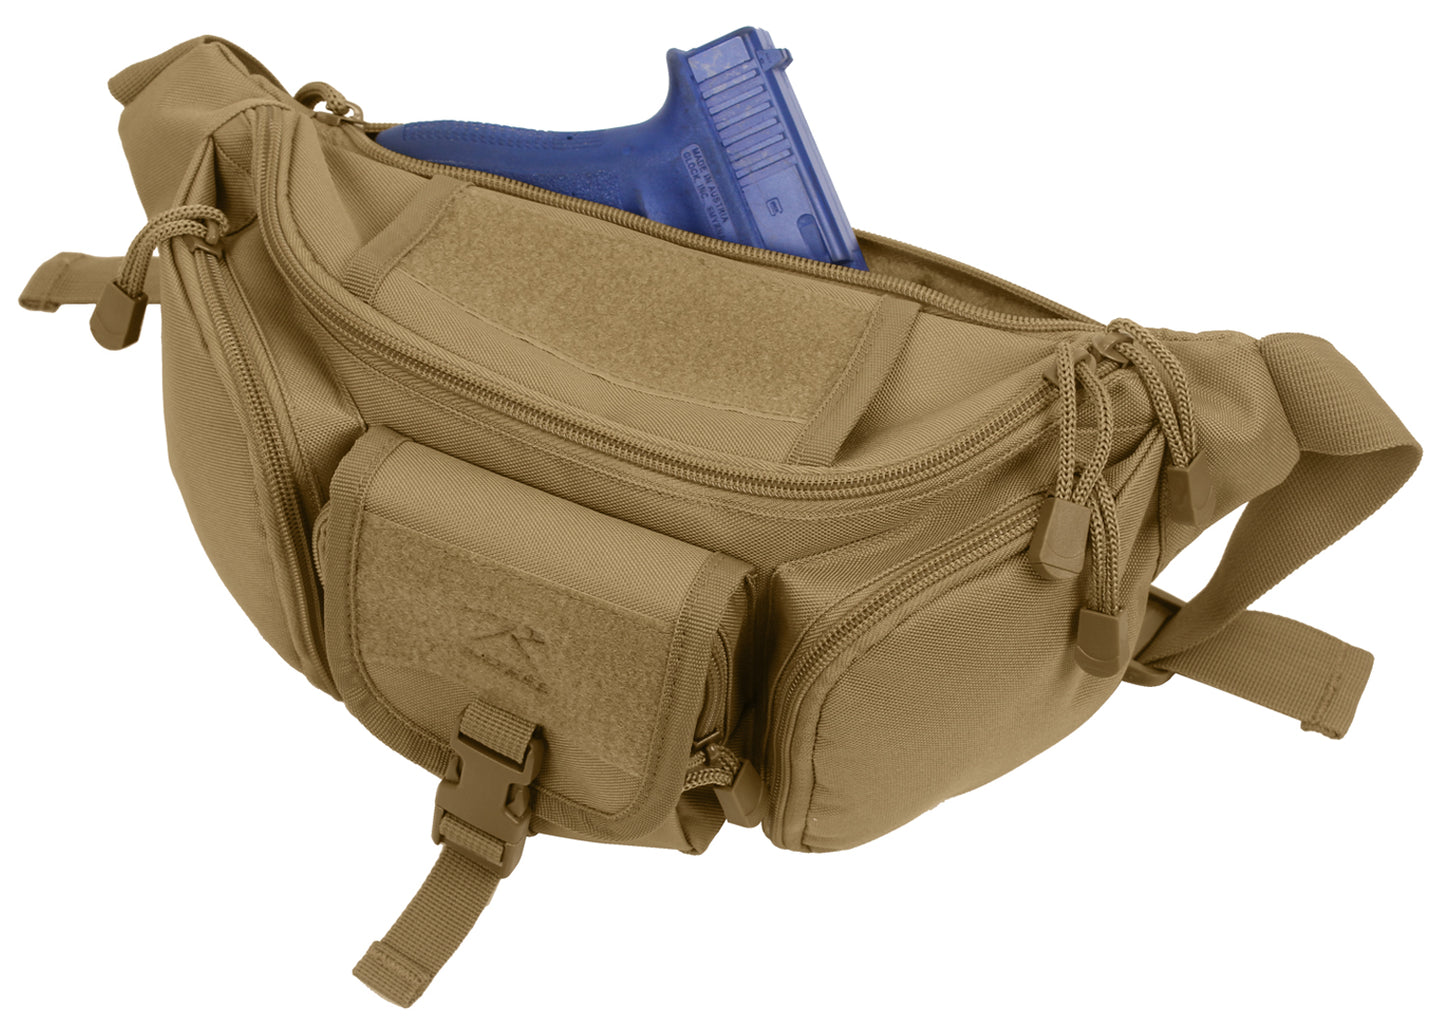 Wild West Tactical Concealed Carry Waist Pack